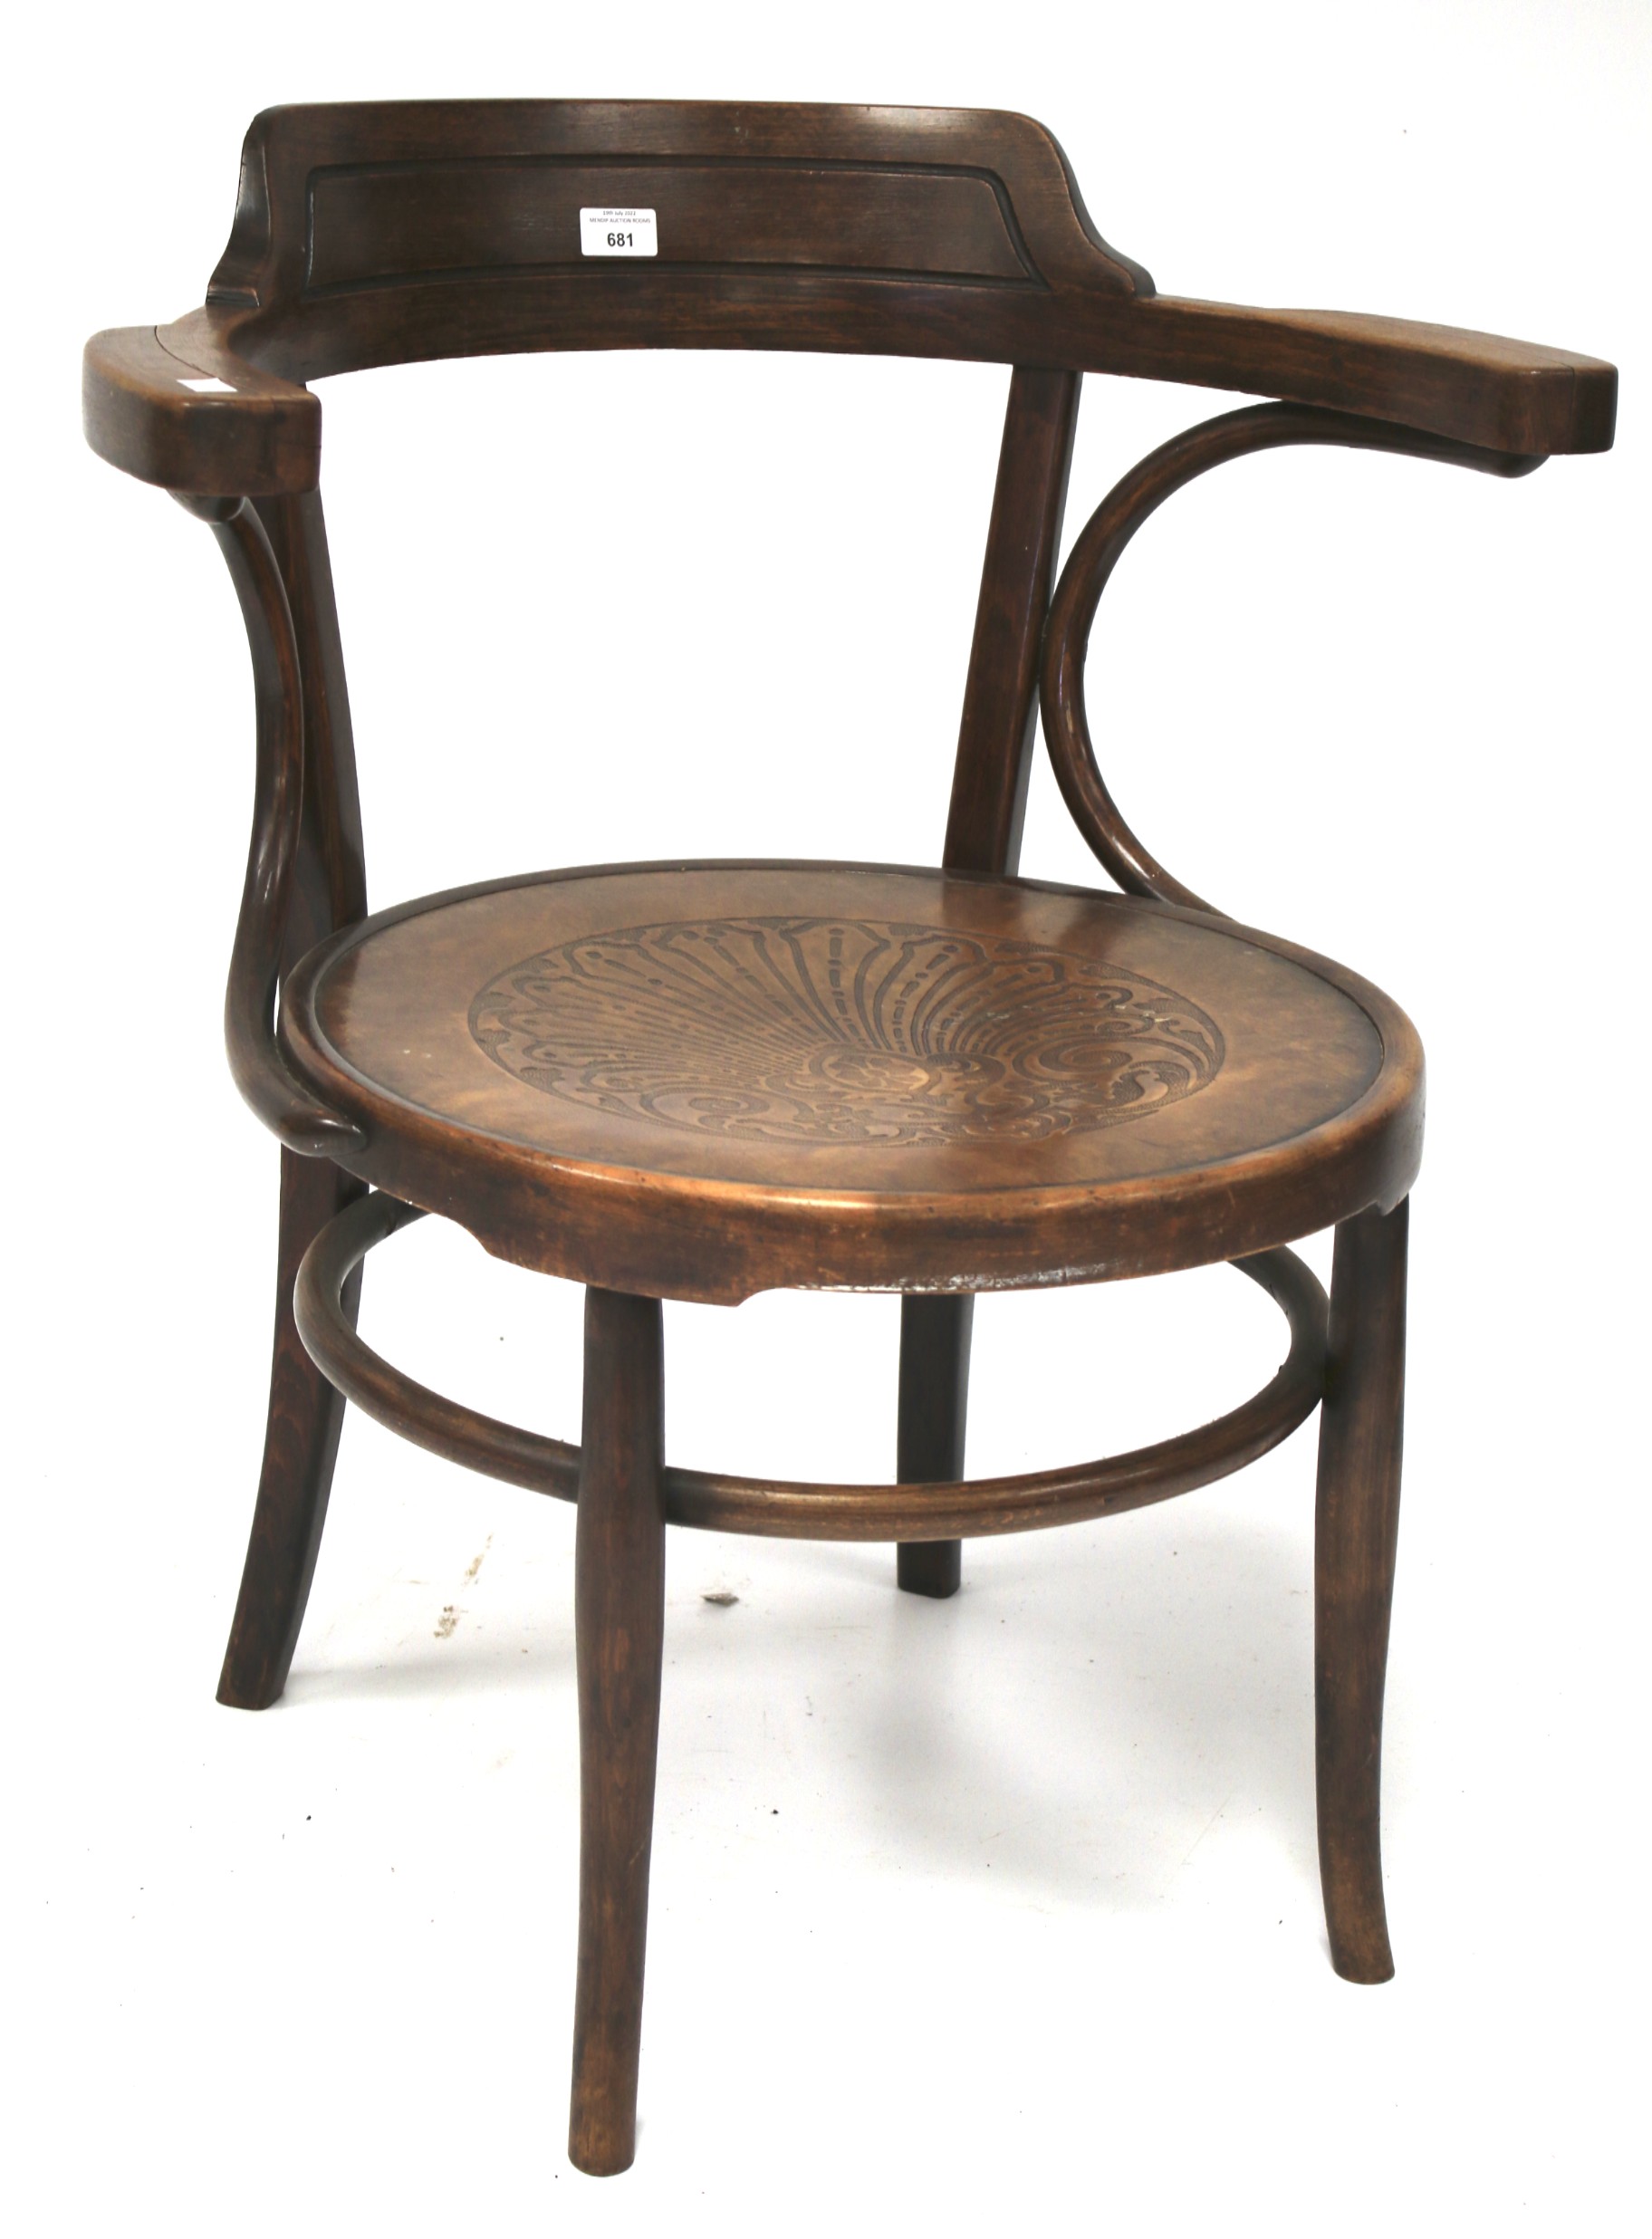 A bentwood elbow chair with carved decoration to the seat.